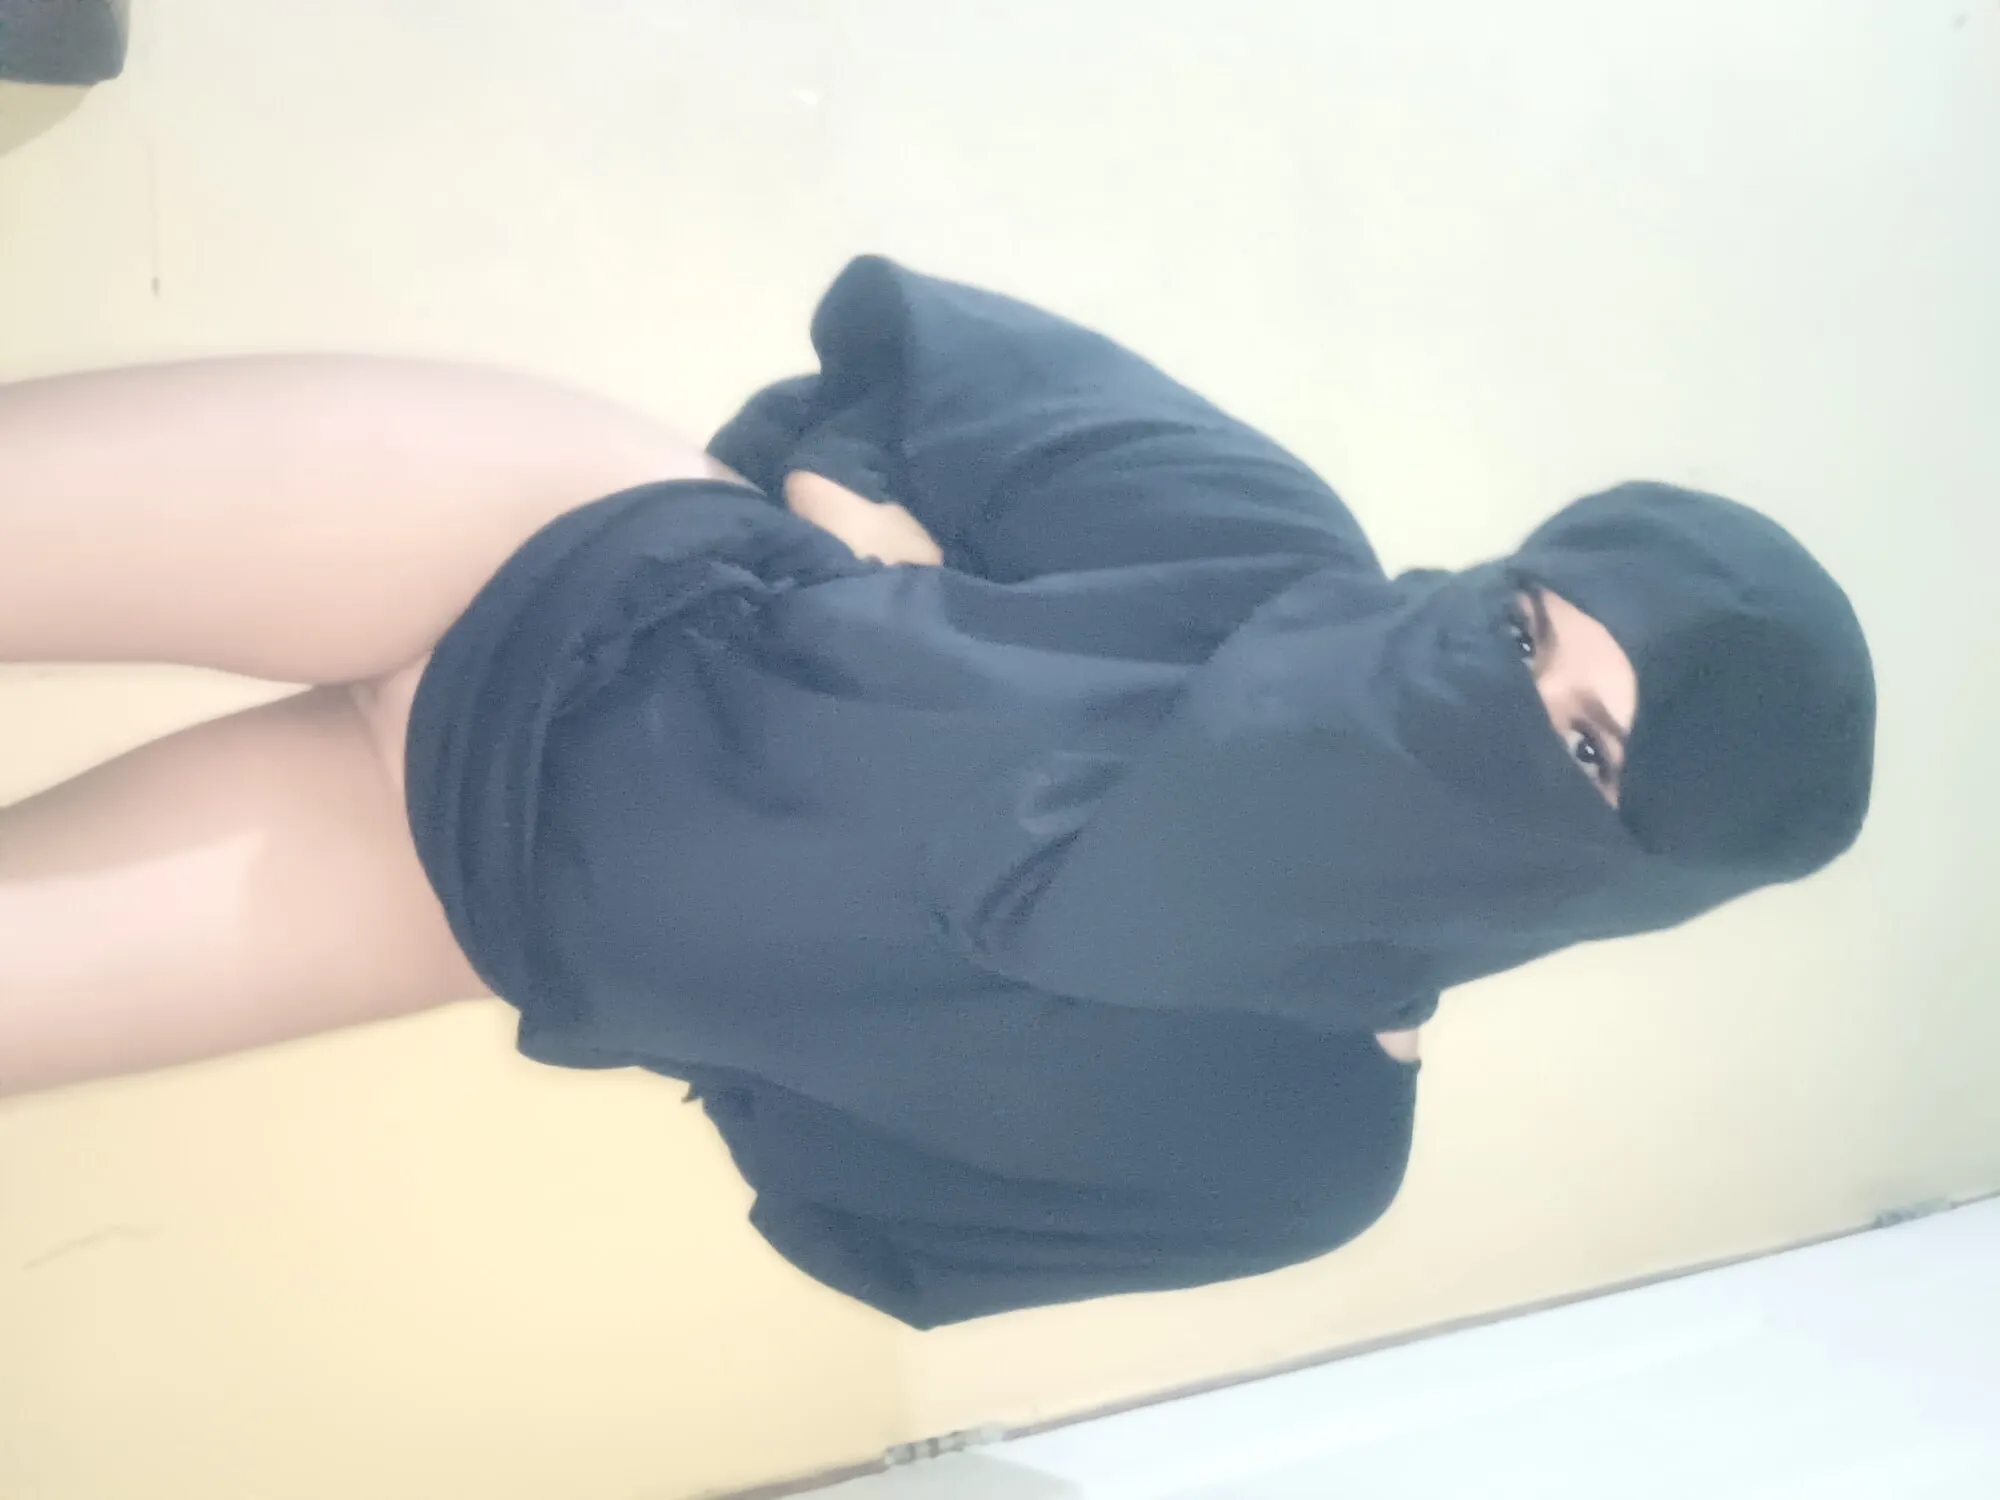 Amateur Petite Teen Arab Shows Pussy, Ass And Tits In Niqab